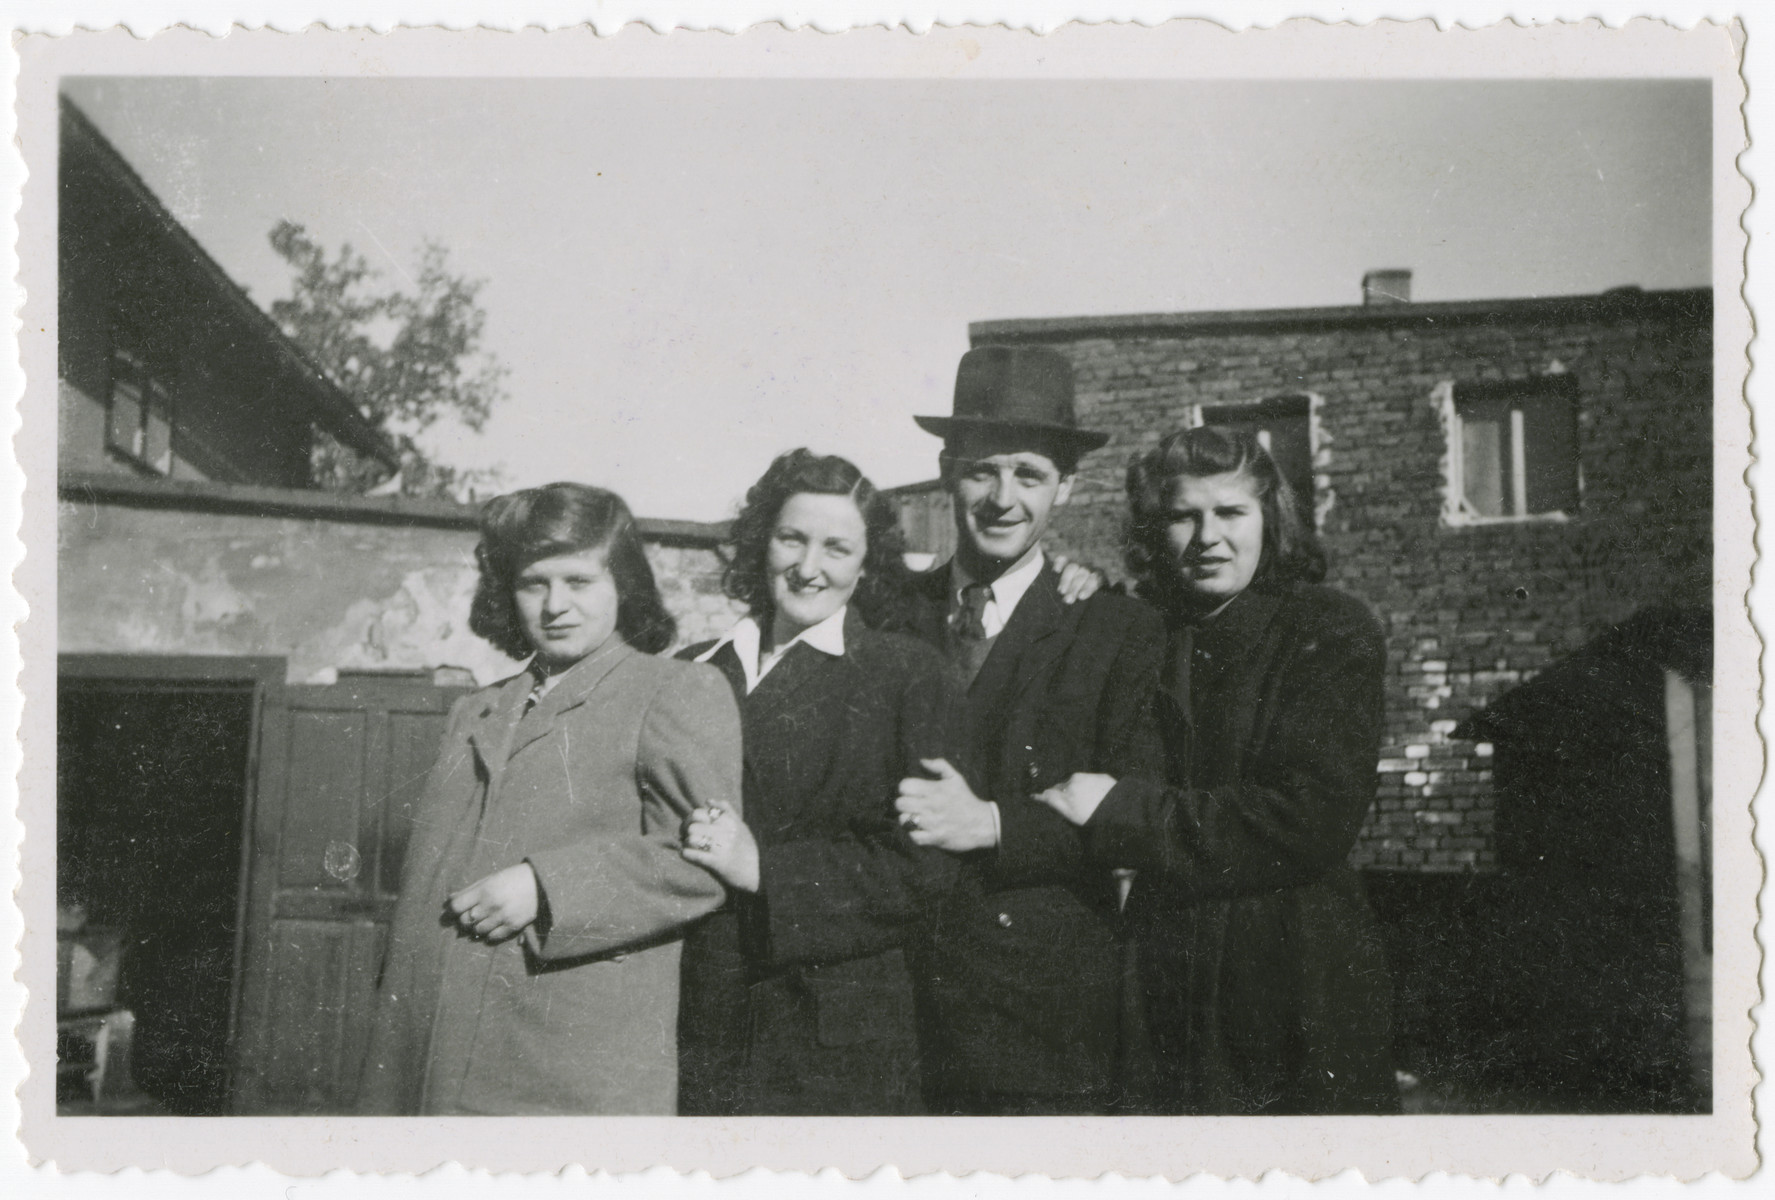 Four cousins pose togther in Kusnice prior to the German invasion.

From left to right are Helena, Esti, Bernard and Ruth.  Helena and Ruth were the sisters of Eva Weinberger.  Bernard was their cousin, and Esti was Bernard's future wife.  All four survived the Holocaust.  Bernard and Esti later immigrated to Bolivia.